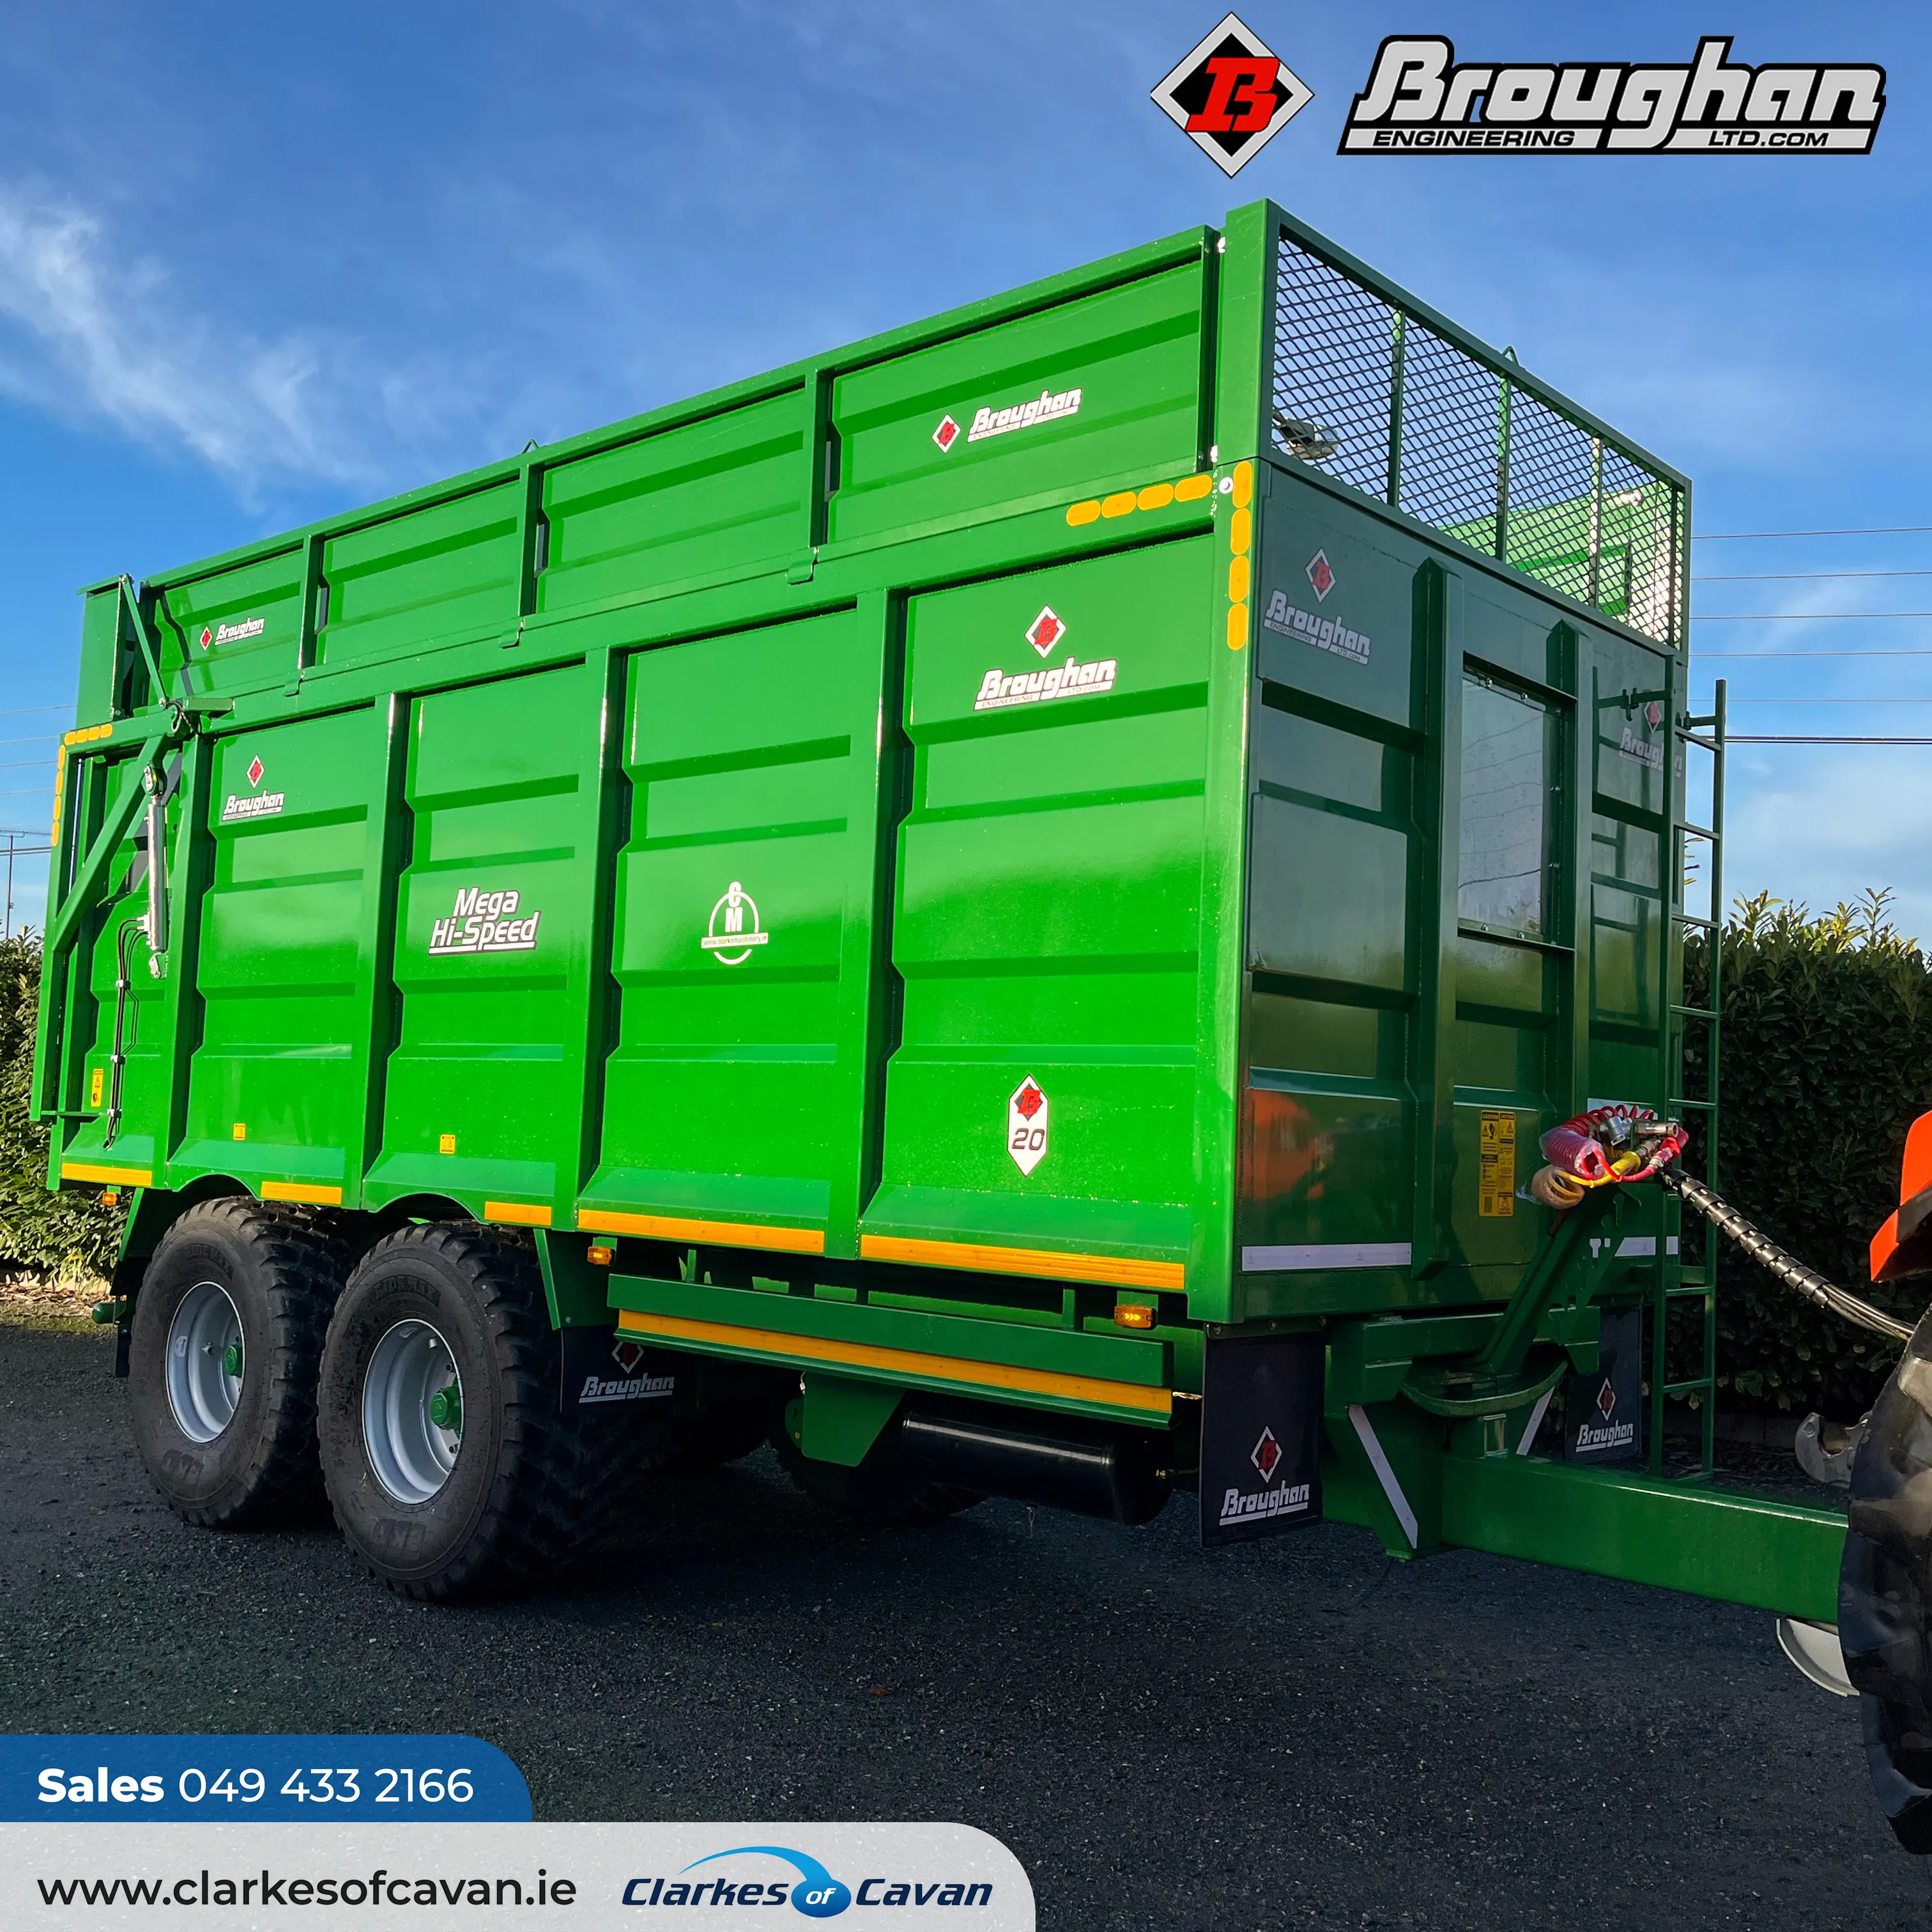 Broughan 20ft Silage Trailer